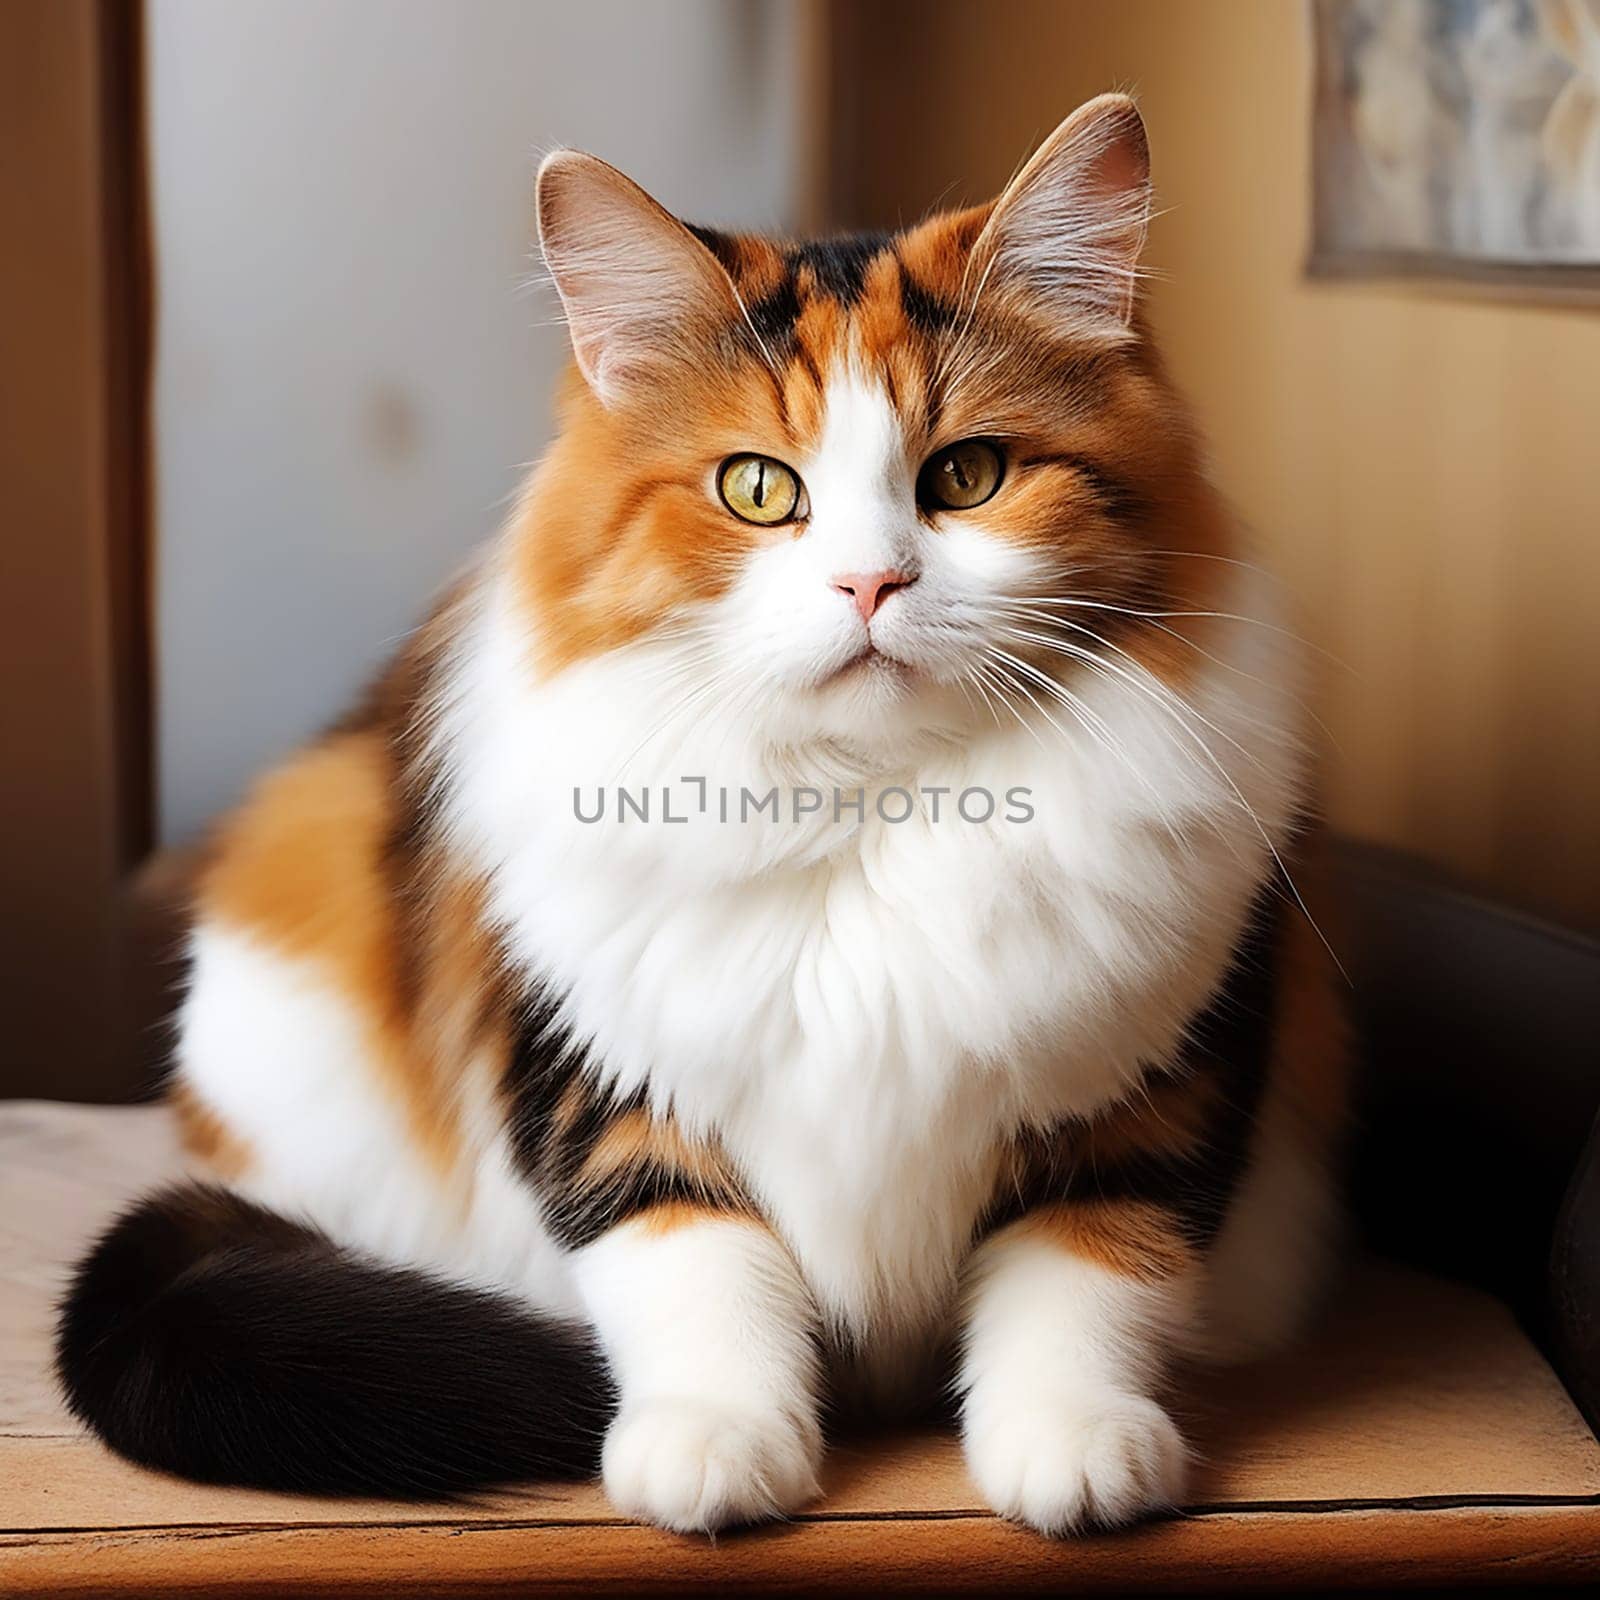 The Quirky Appeal of a Fat Calico Cat by Petrichor